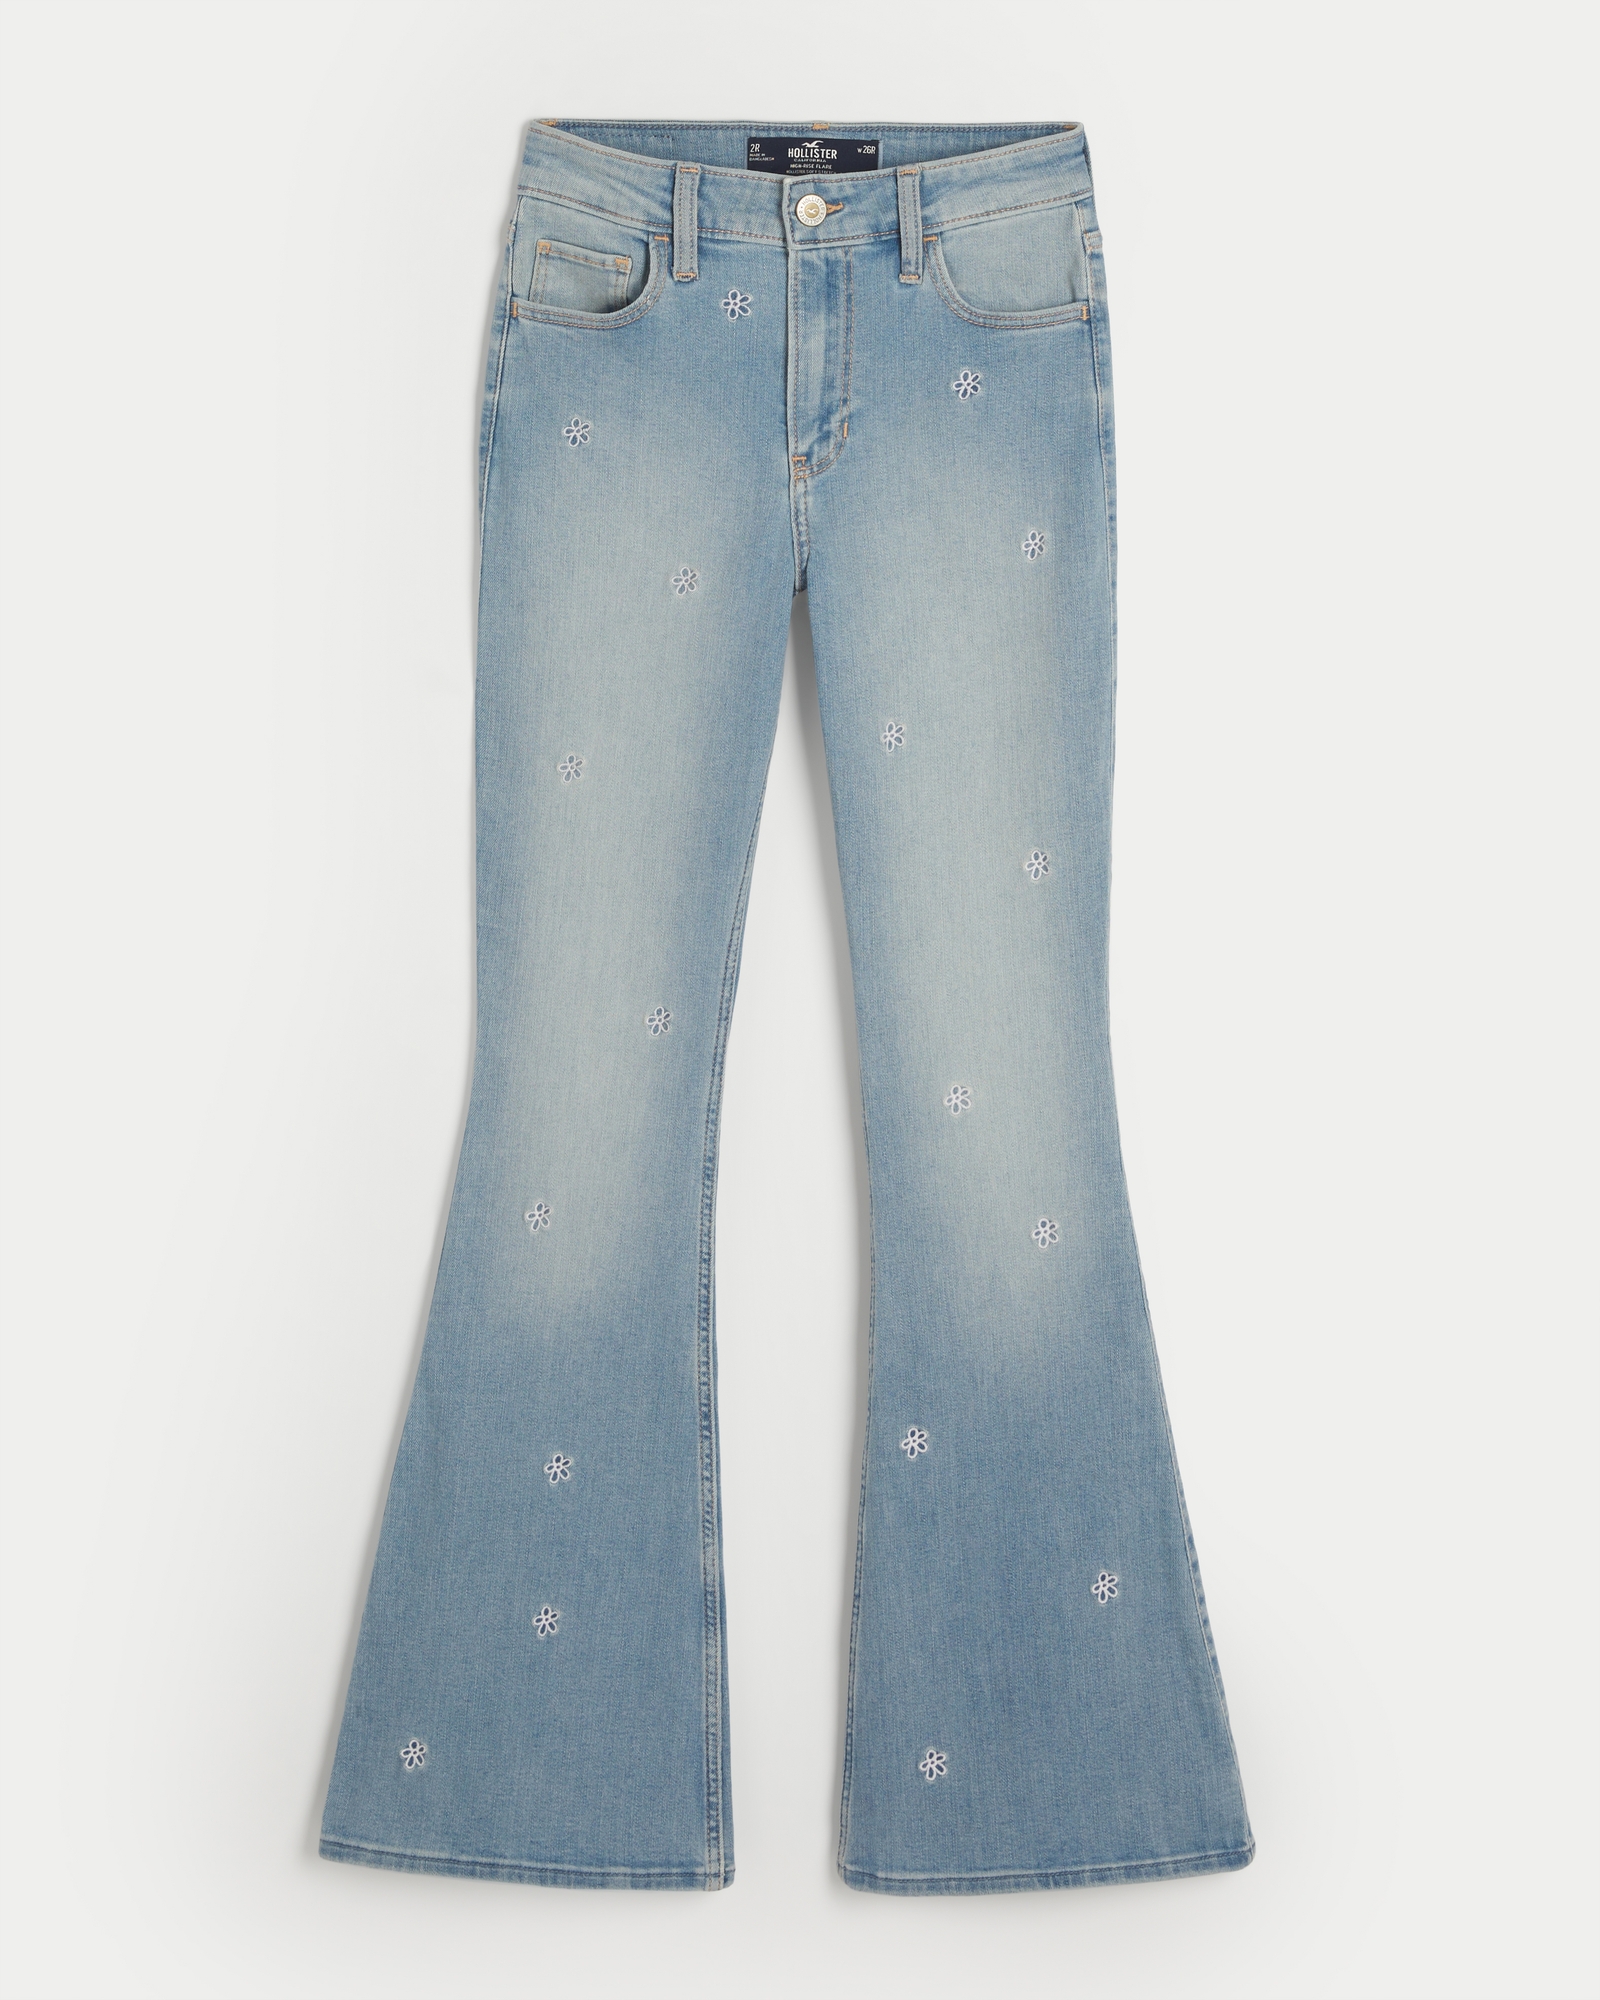 Women's Skinny Ripped Bell Bottom Jeans High Waisted Flare Jeans Note  Please Buy One Or Two Sizes Larger